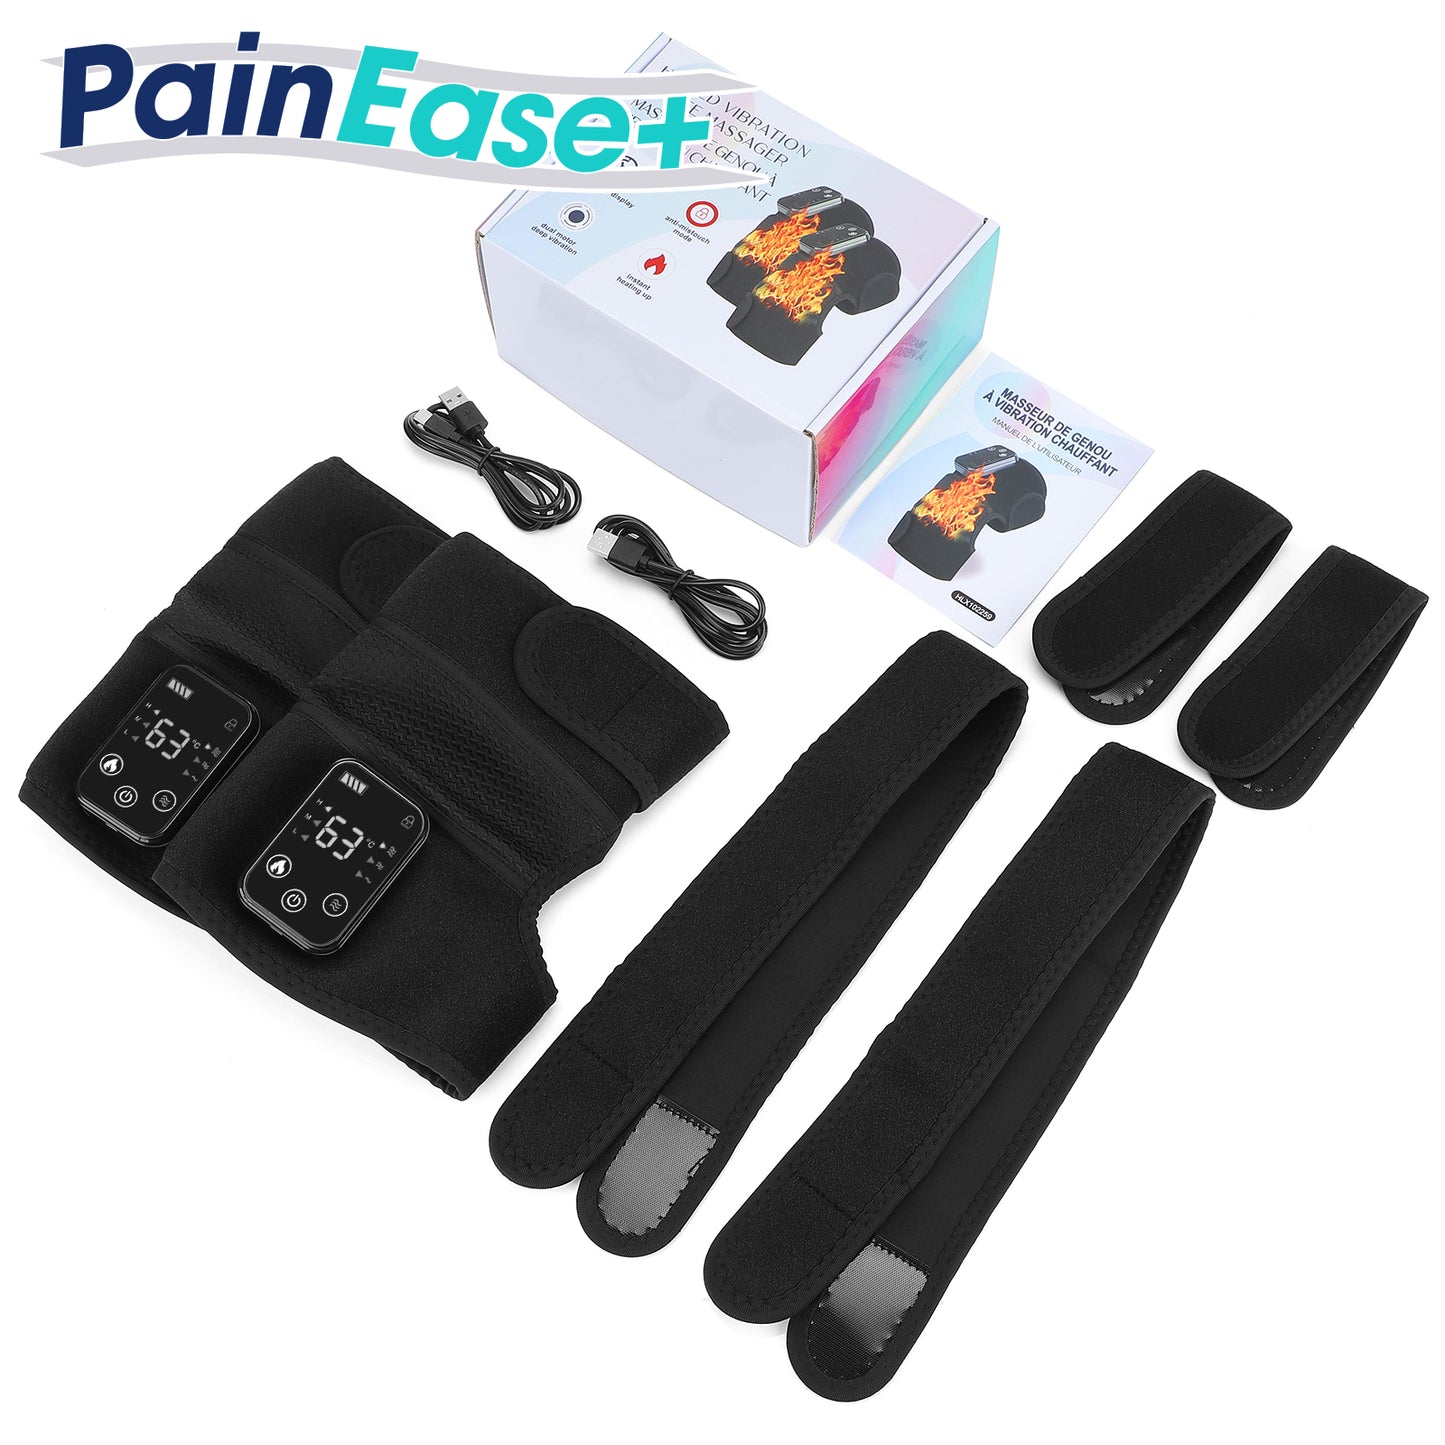 PainEase+ The 3 in 1 Heated Massager for Shoulder, Elbow or Knee